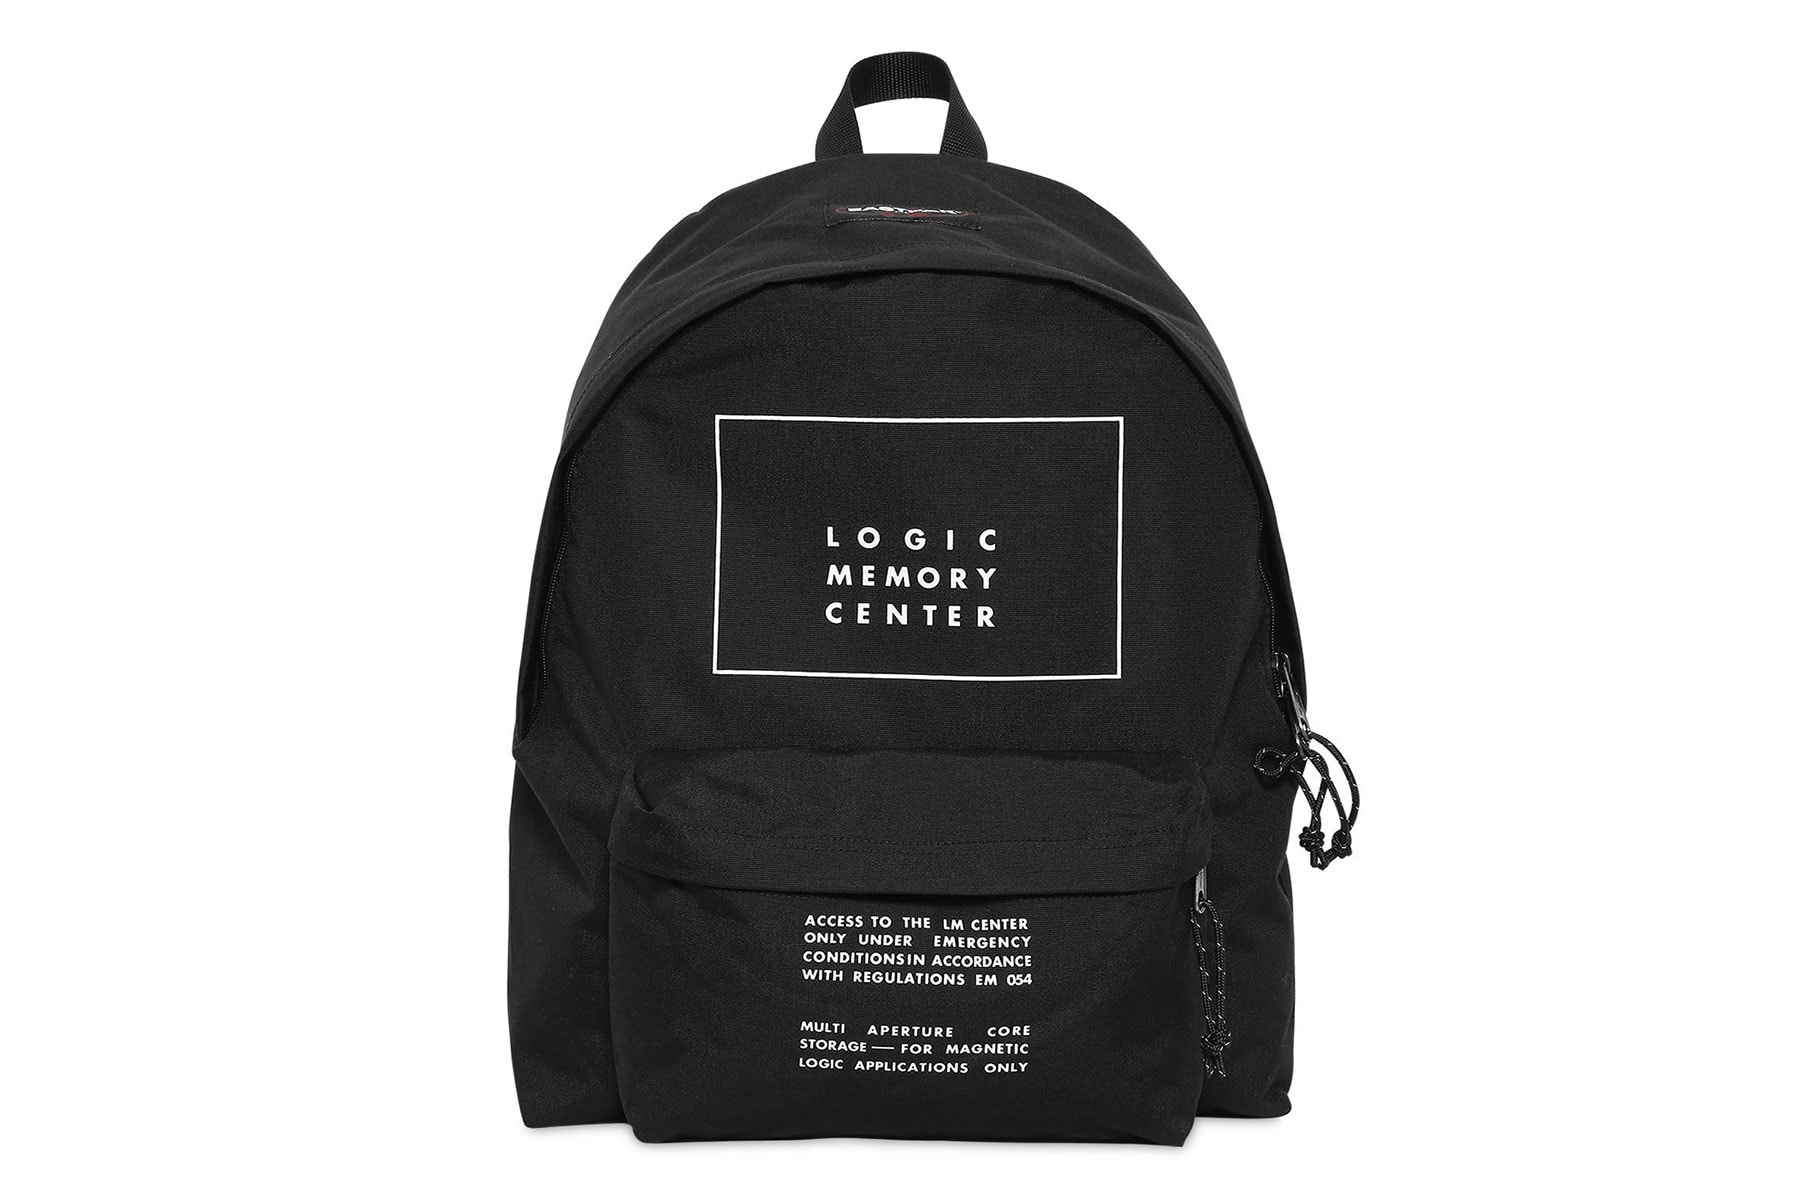 undercover eastpak fall winter 2018 bag backpack collaboration stanley kubrick 2001 space odyssey inspiration buy purchase pre order drop release date info buy black green red